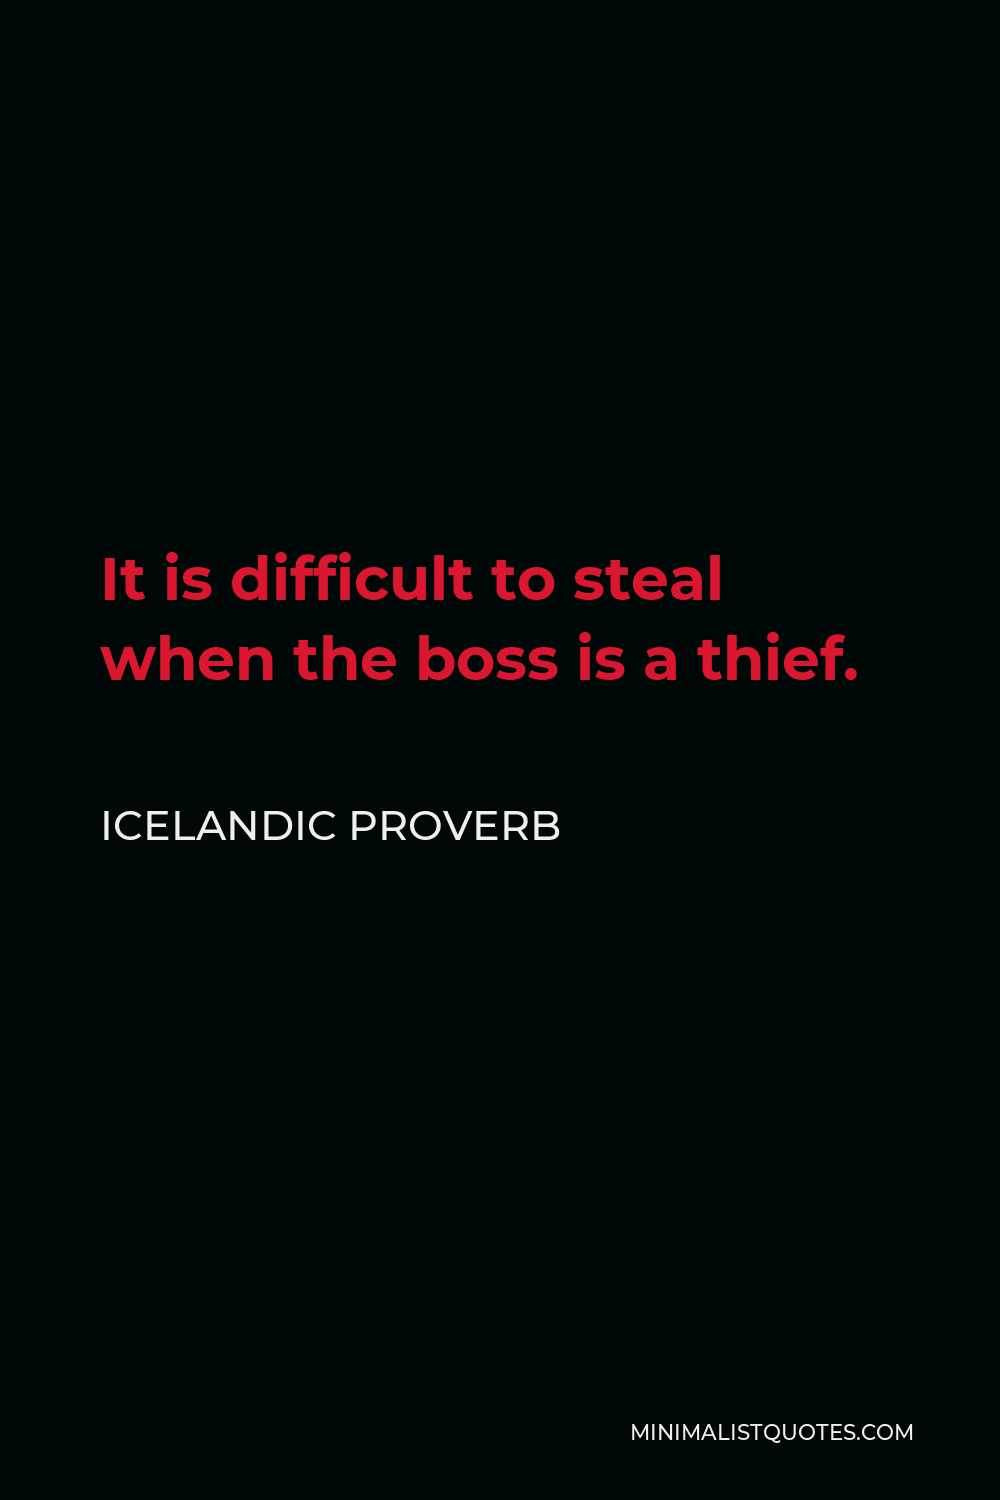 Icelandic Proverb Quote - It is difficult to steal when the boss is a thief.